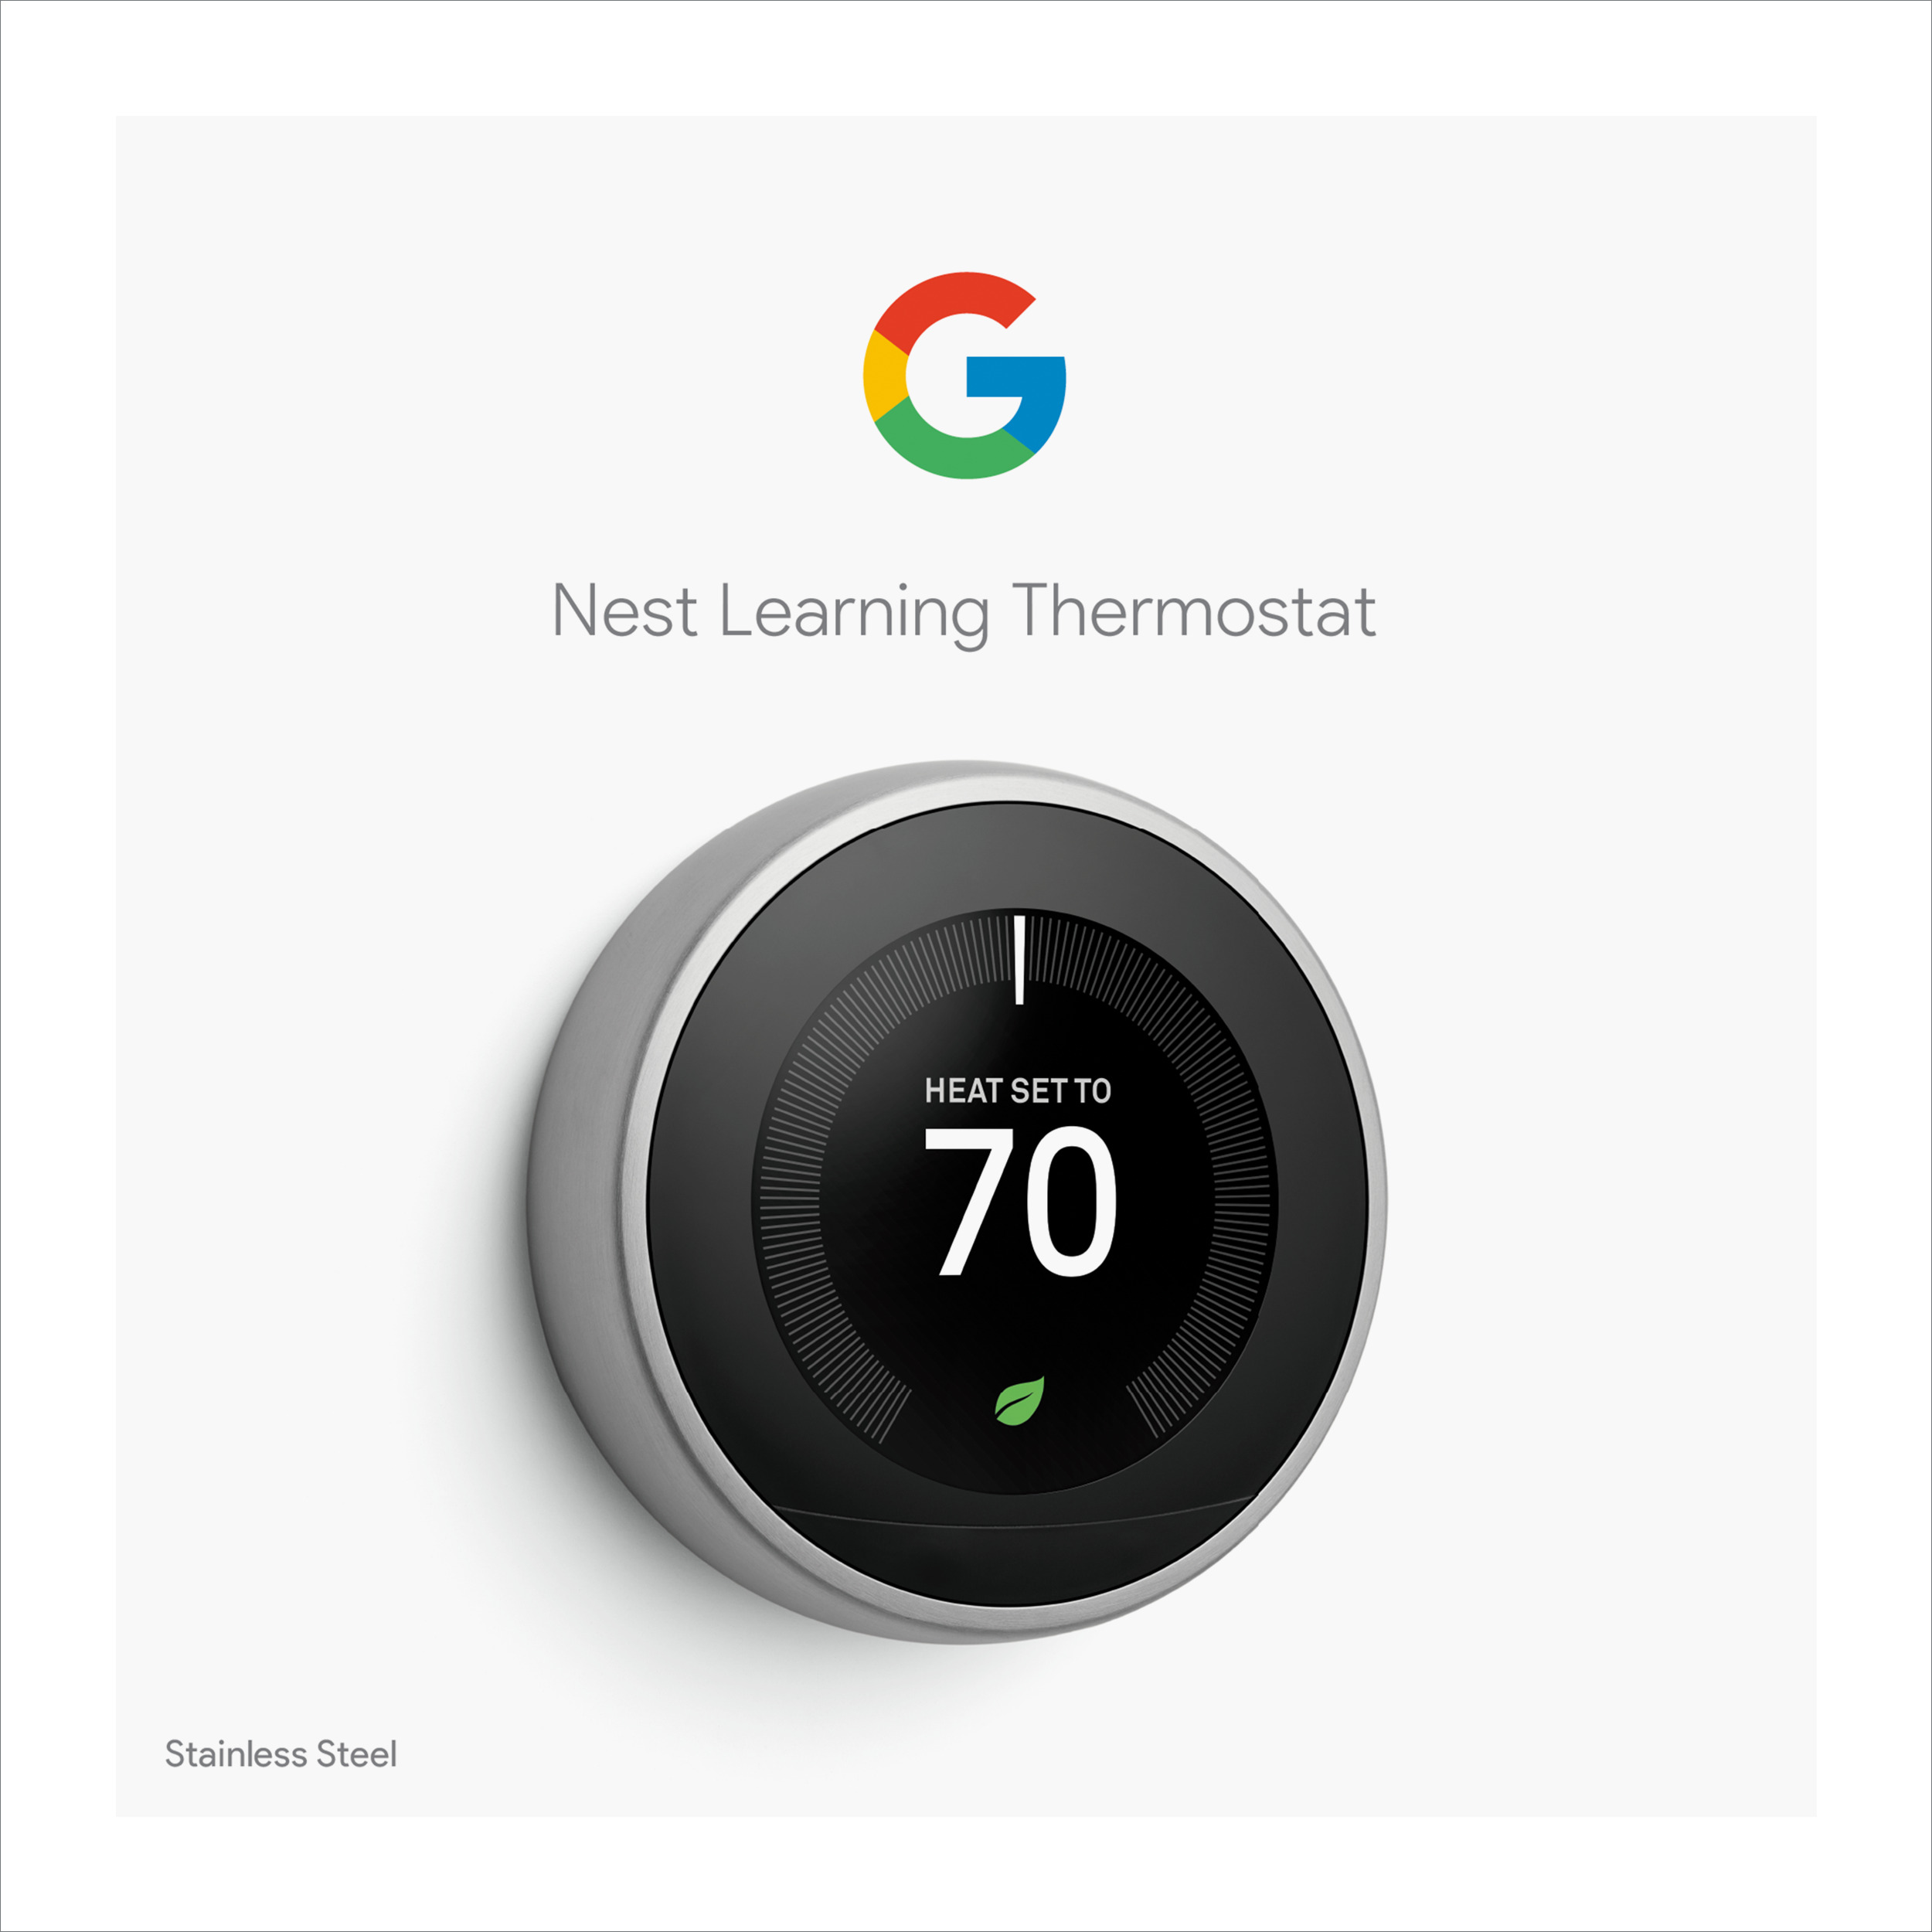 Nest Smart Learning Thermostat - 3rd Generation - Stainless Steel - image 11 of 15